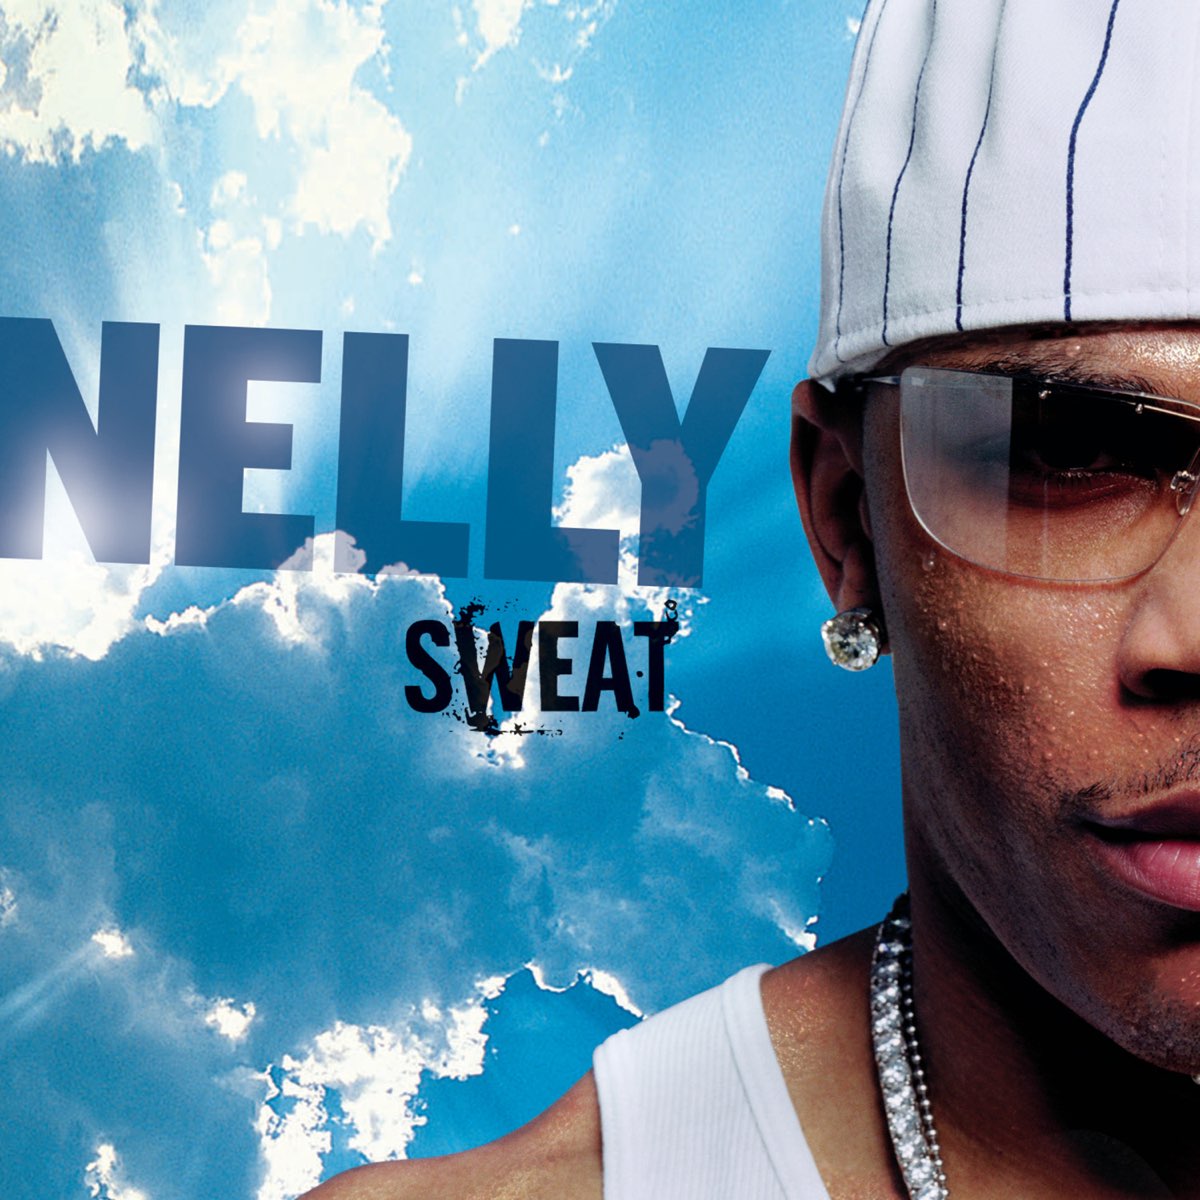 Sweat - Album by Nelly - Apple Music